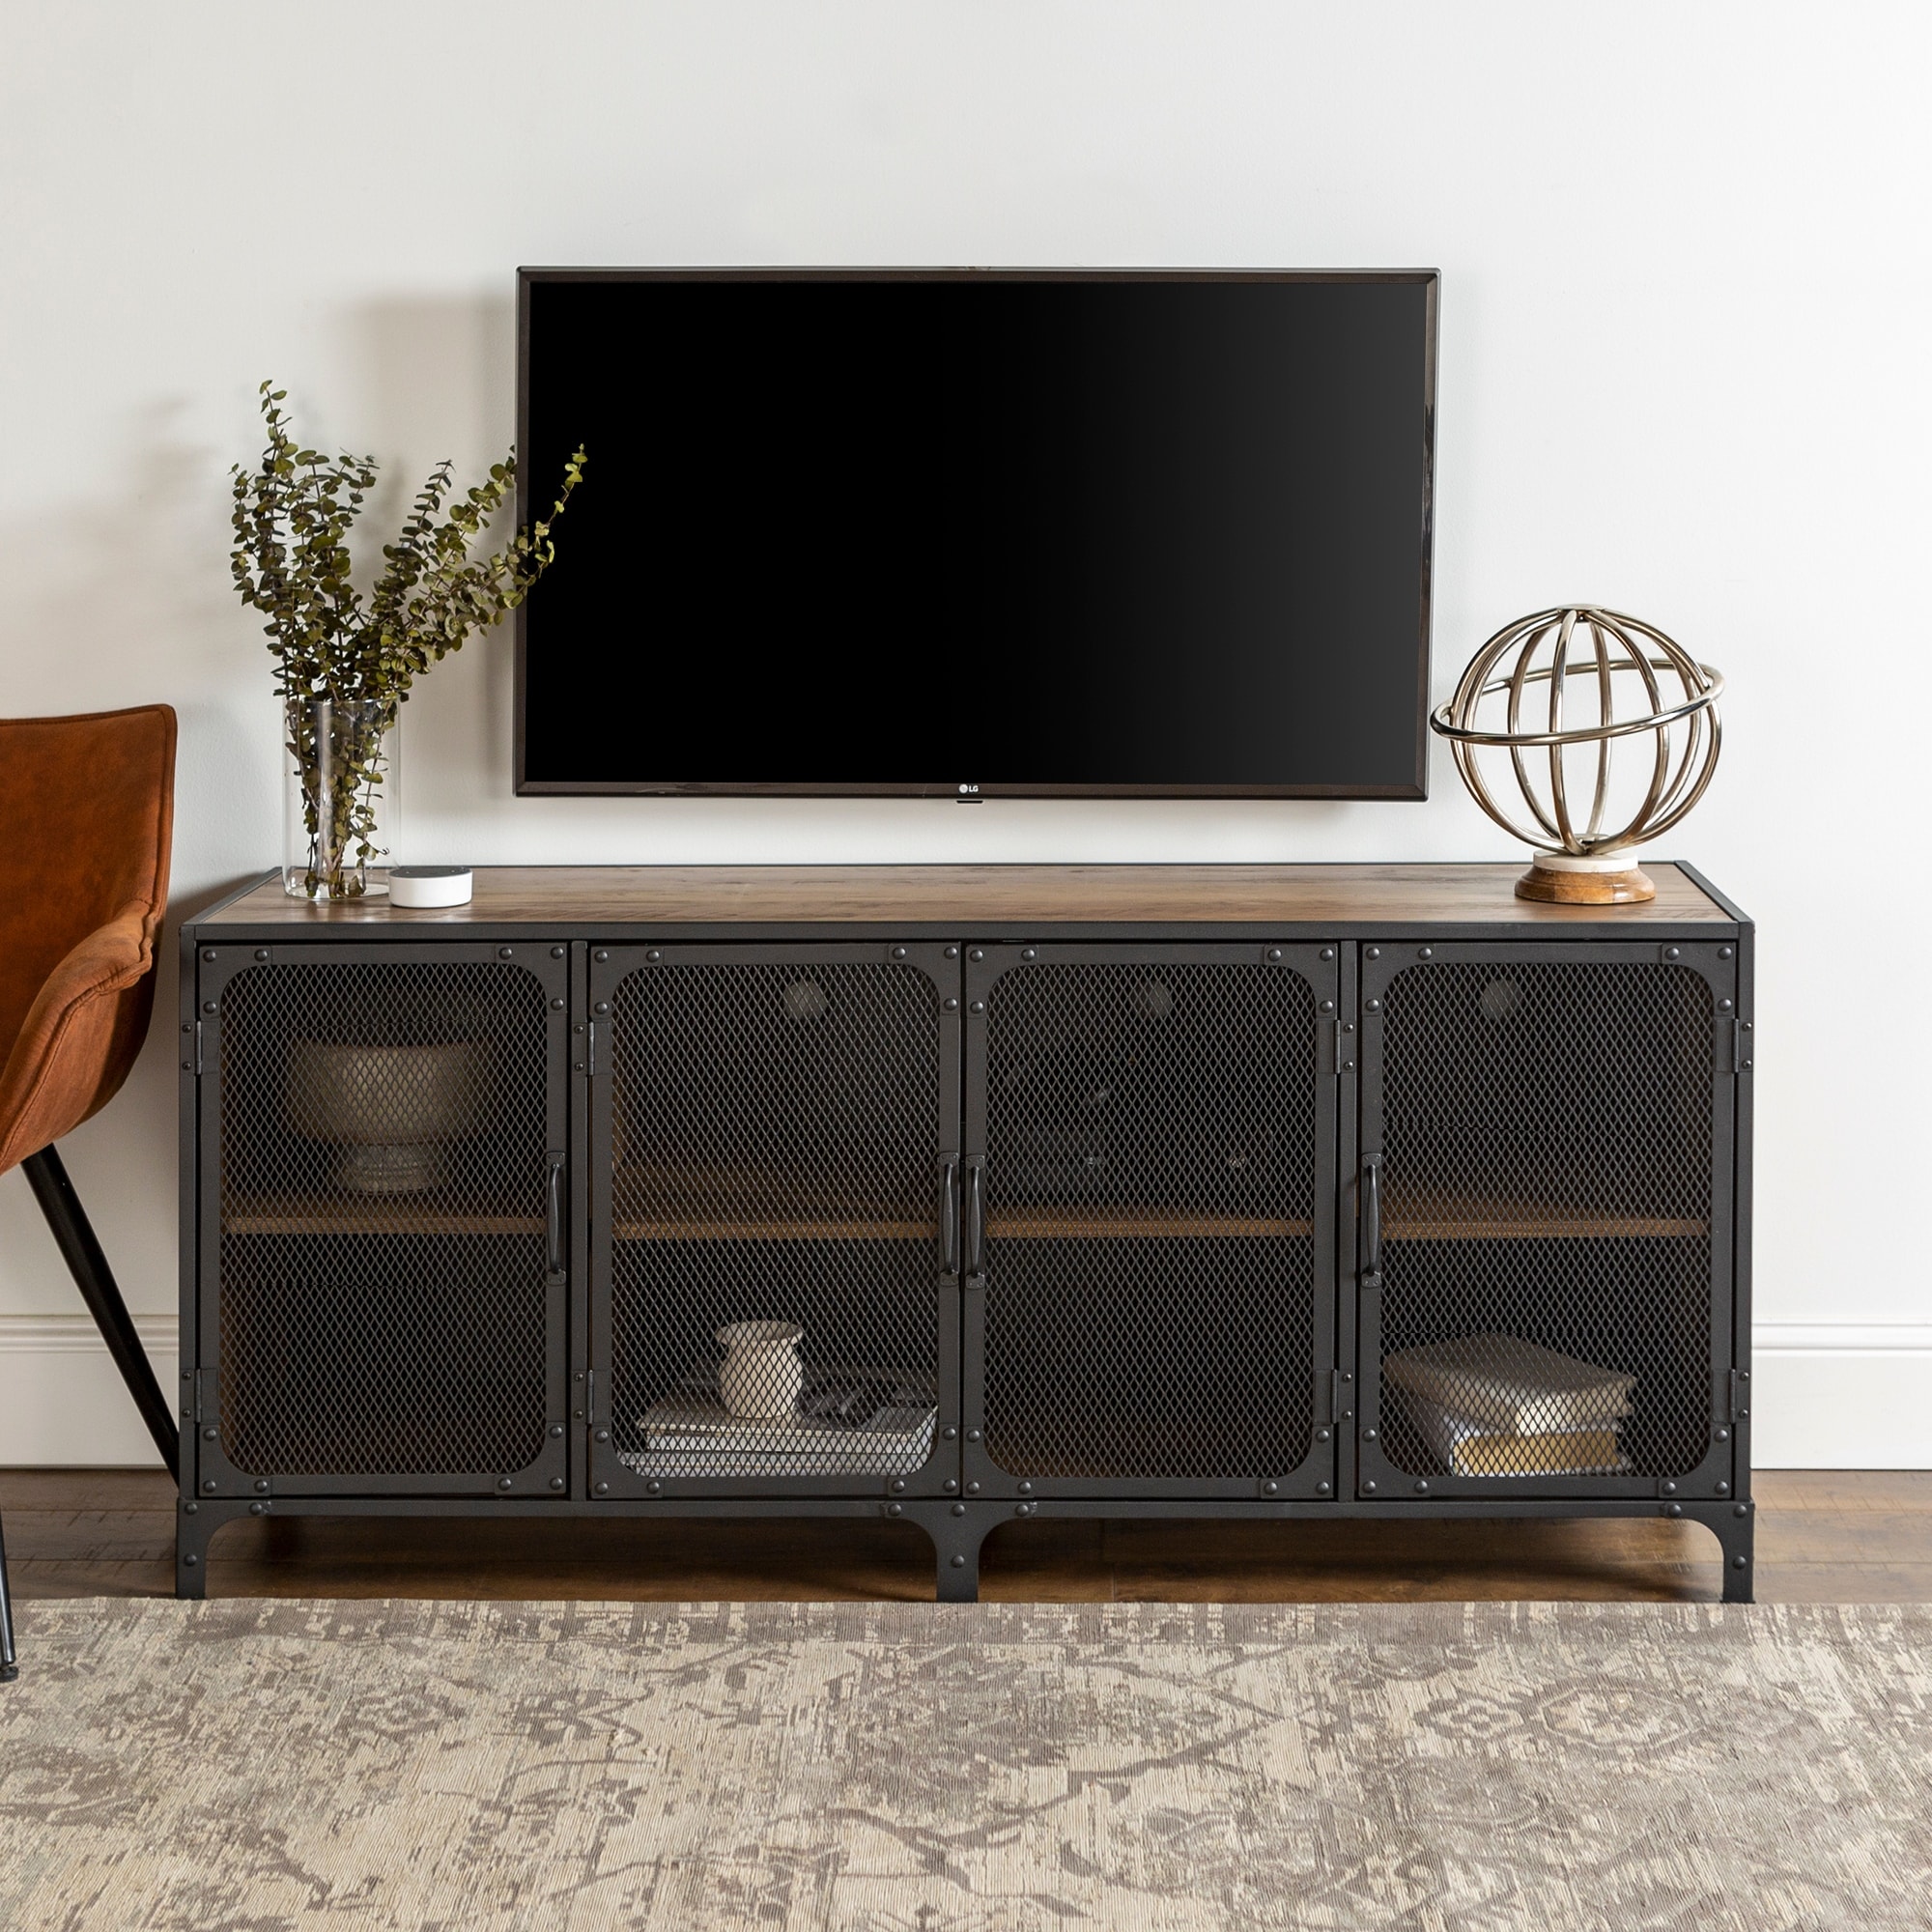 Featured image of post Metal Mesh Tv Stand - Crafted durable metal, this media console is built tough and made to last for decades both in use and look.